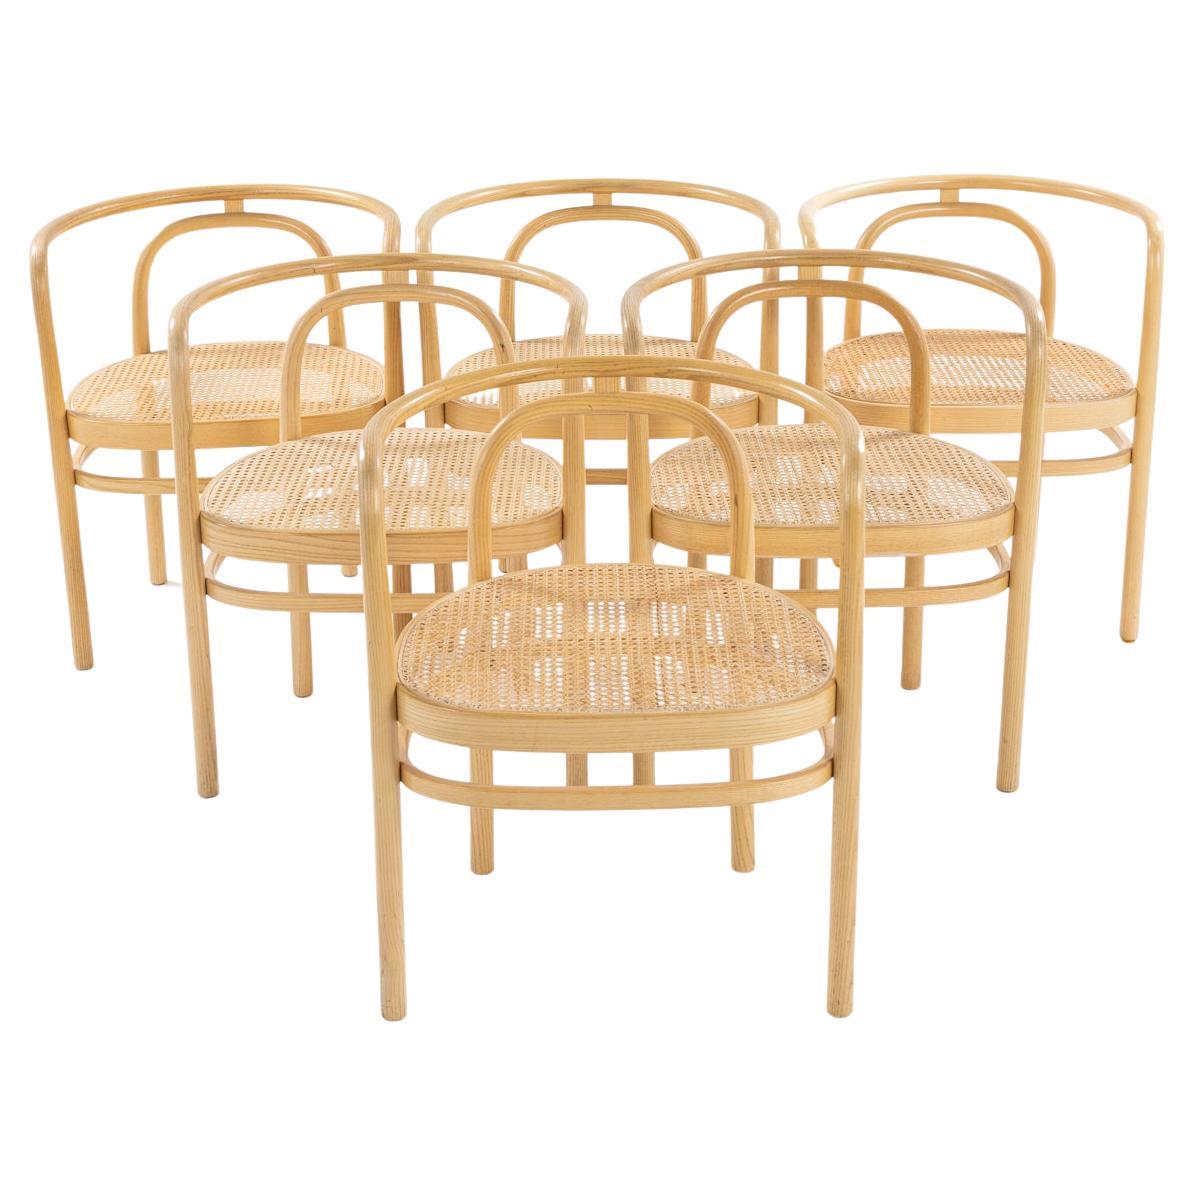 Set of 6 chairs by Poul Kjærholm 